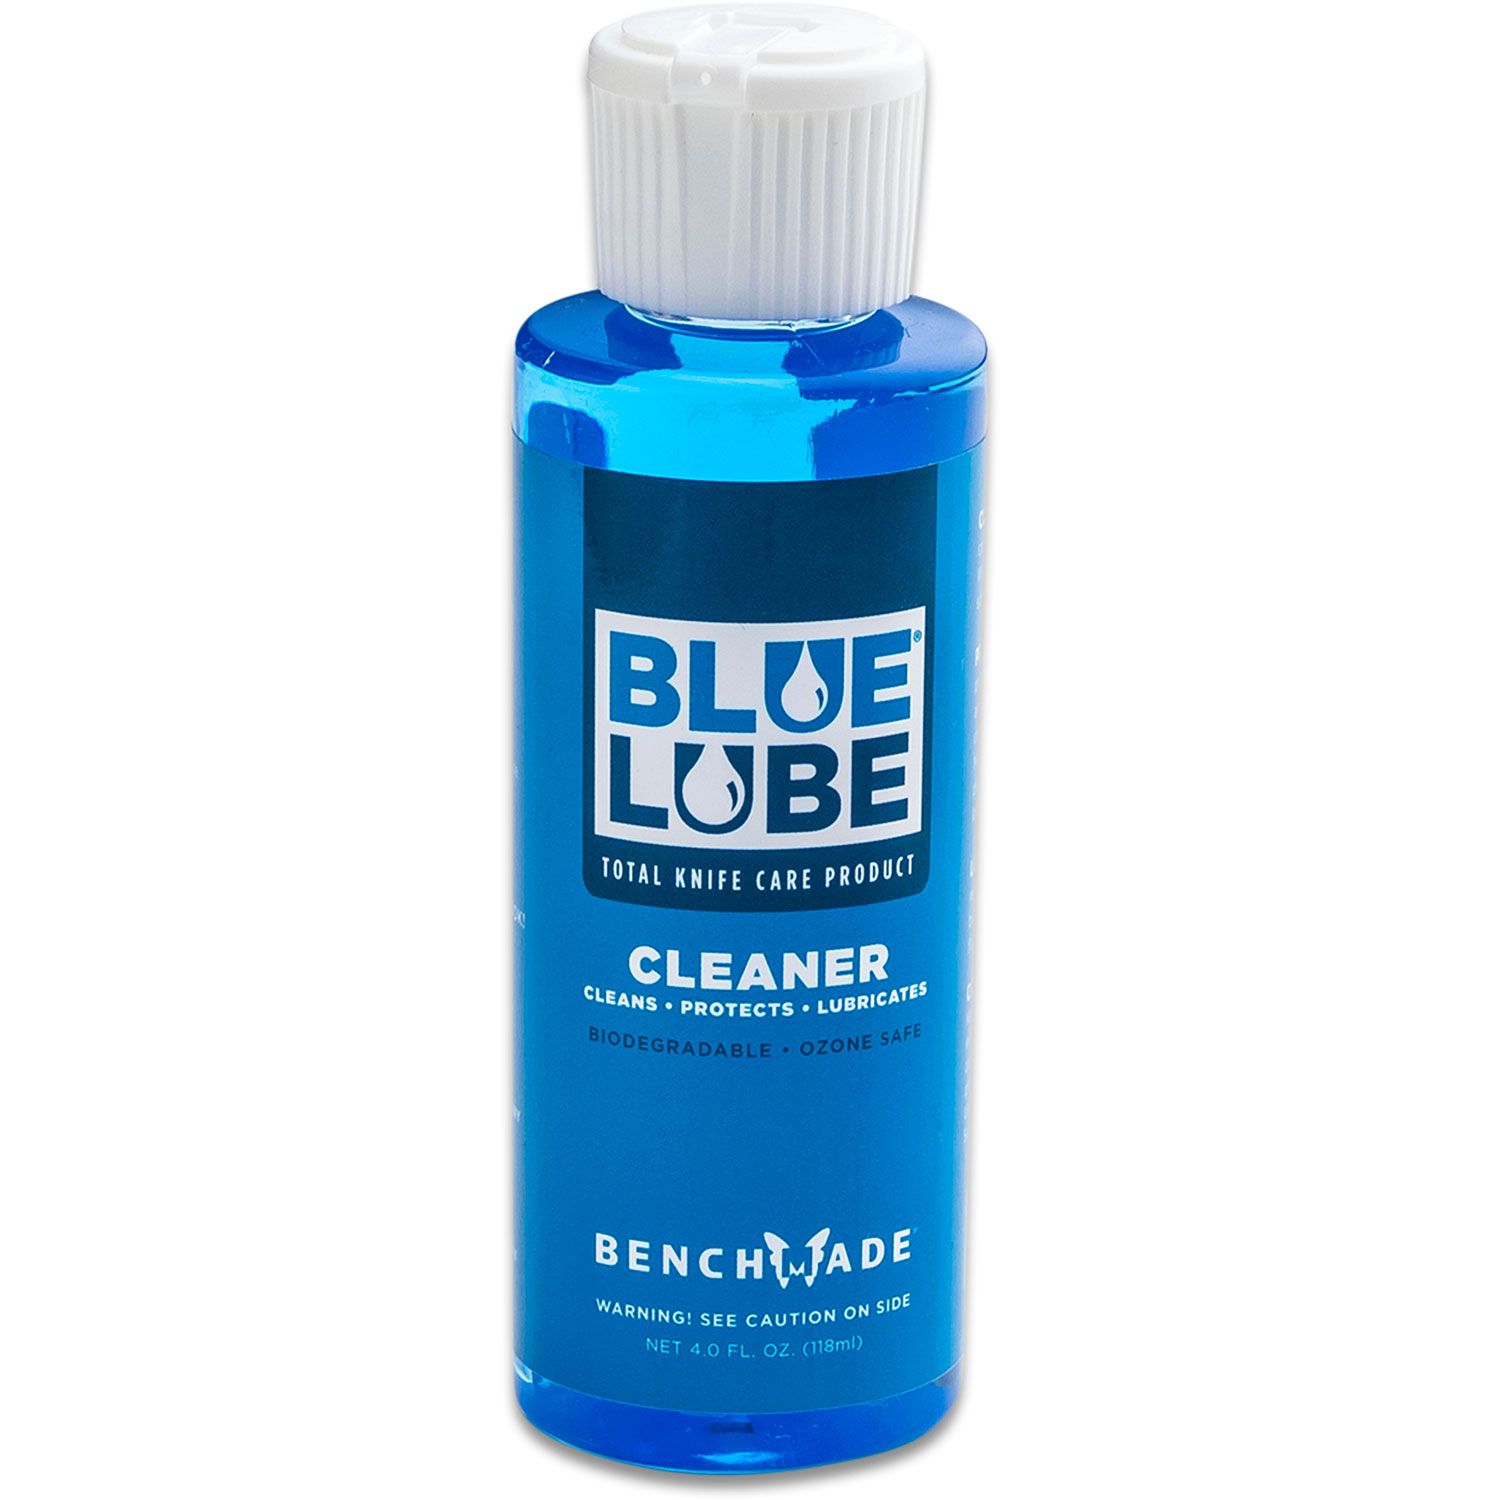  Benchmade Bluelube 1.25oz Knife Care Lubricant